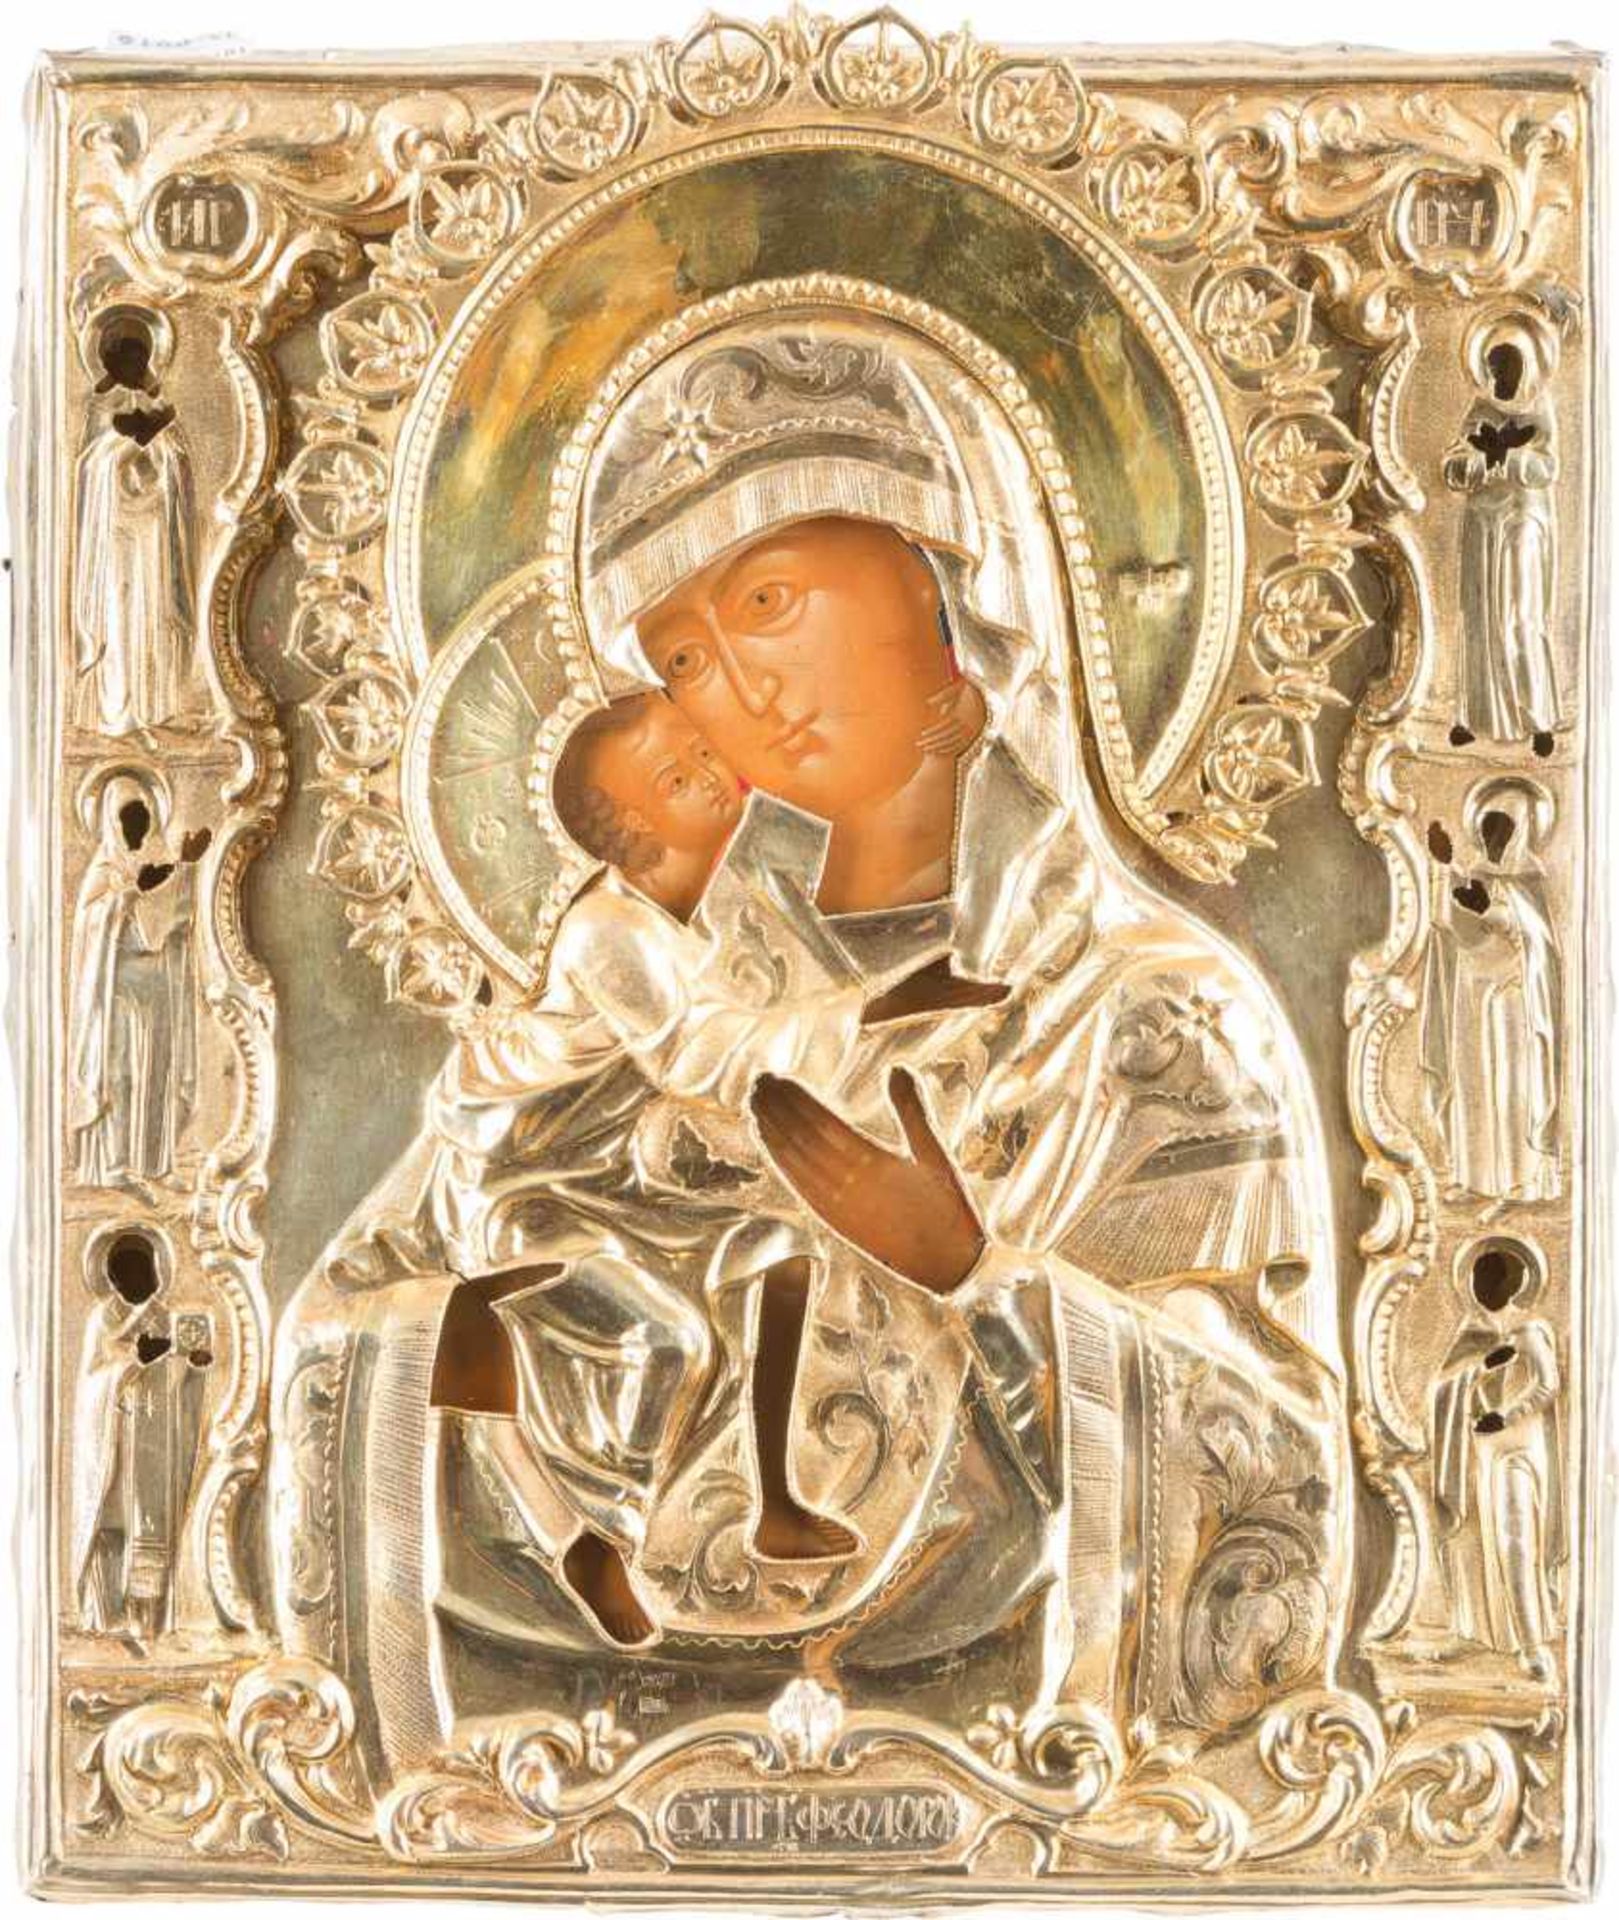 A DATED ICON SHOWING THE FEODOROVSKAYA MOTHER OF GOD WITH A SILVER-GILT OKLAD